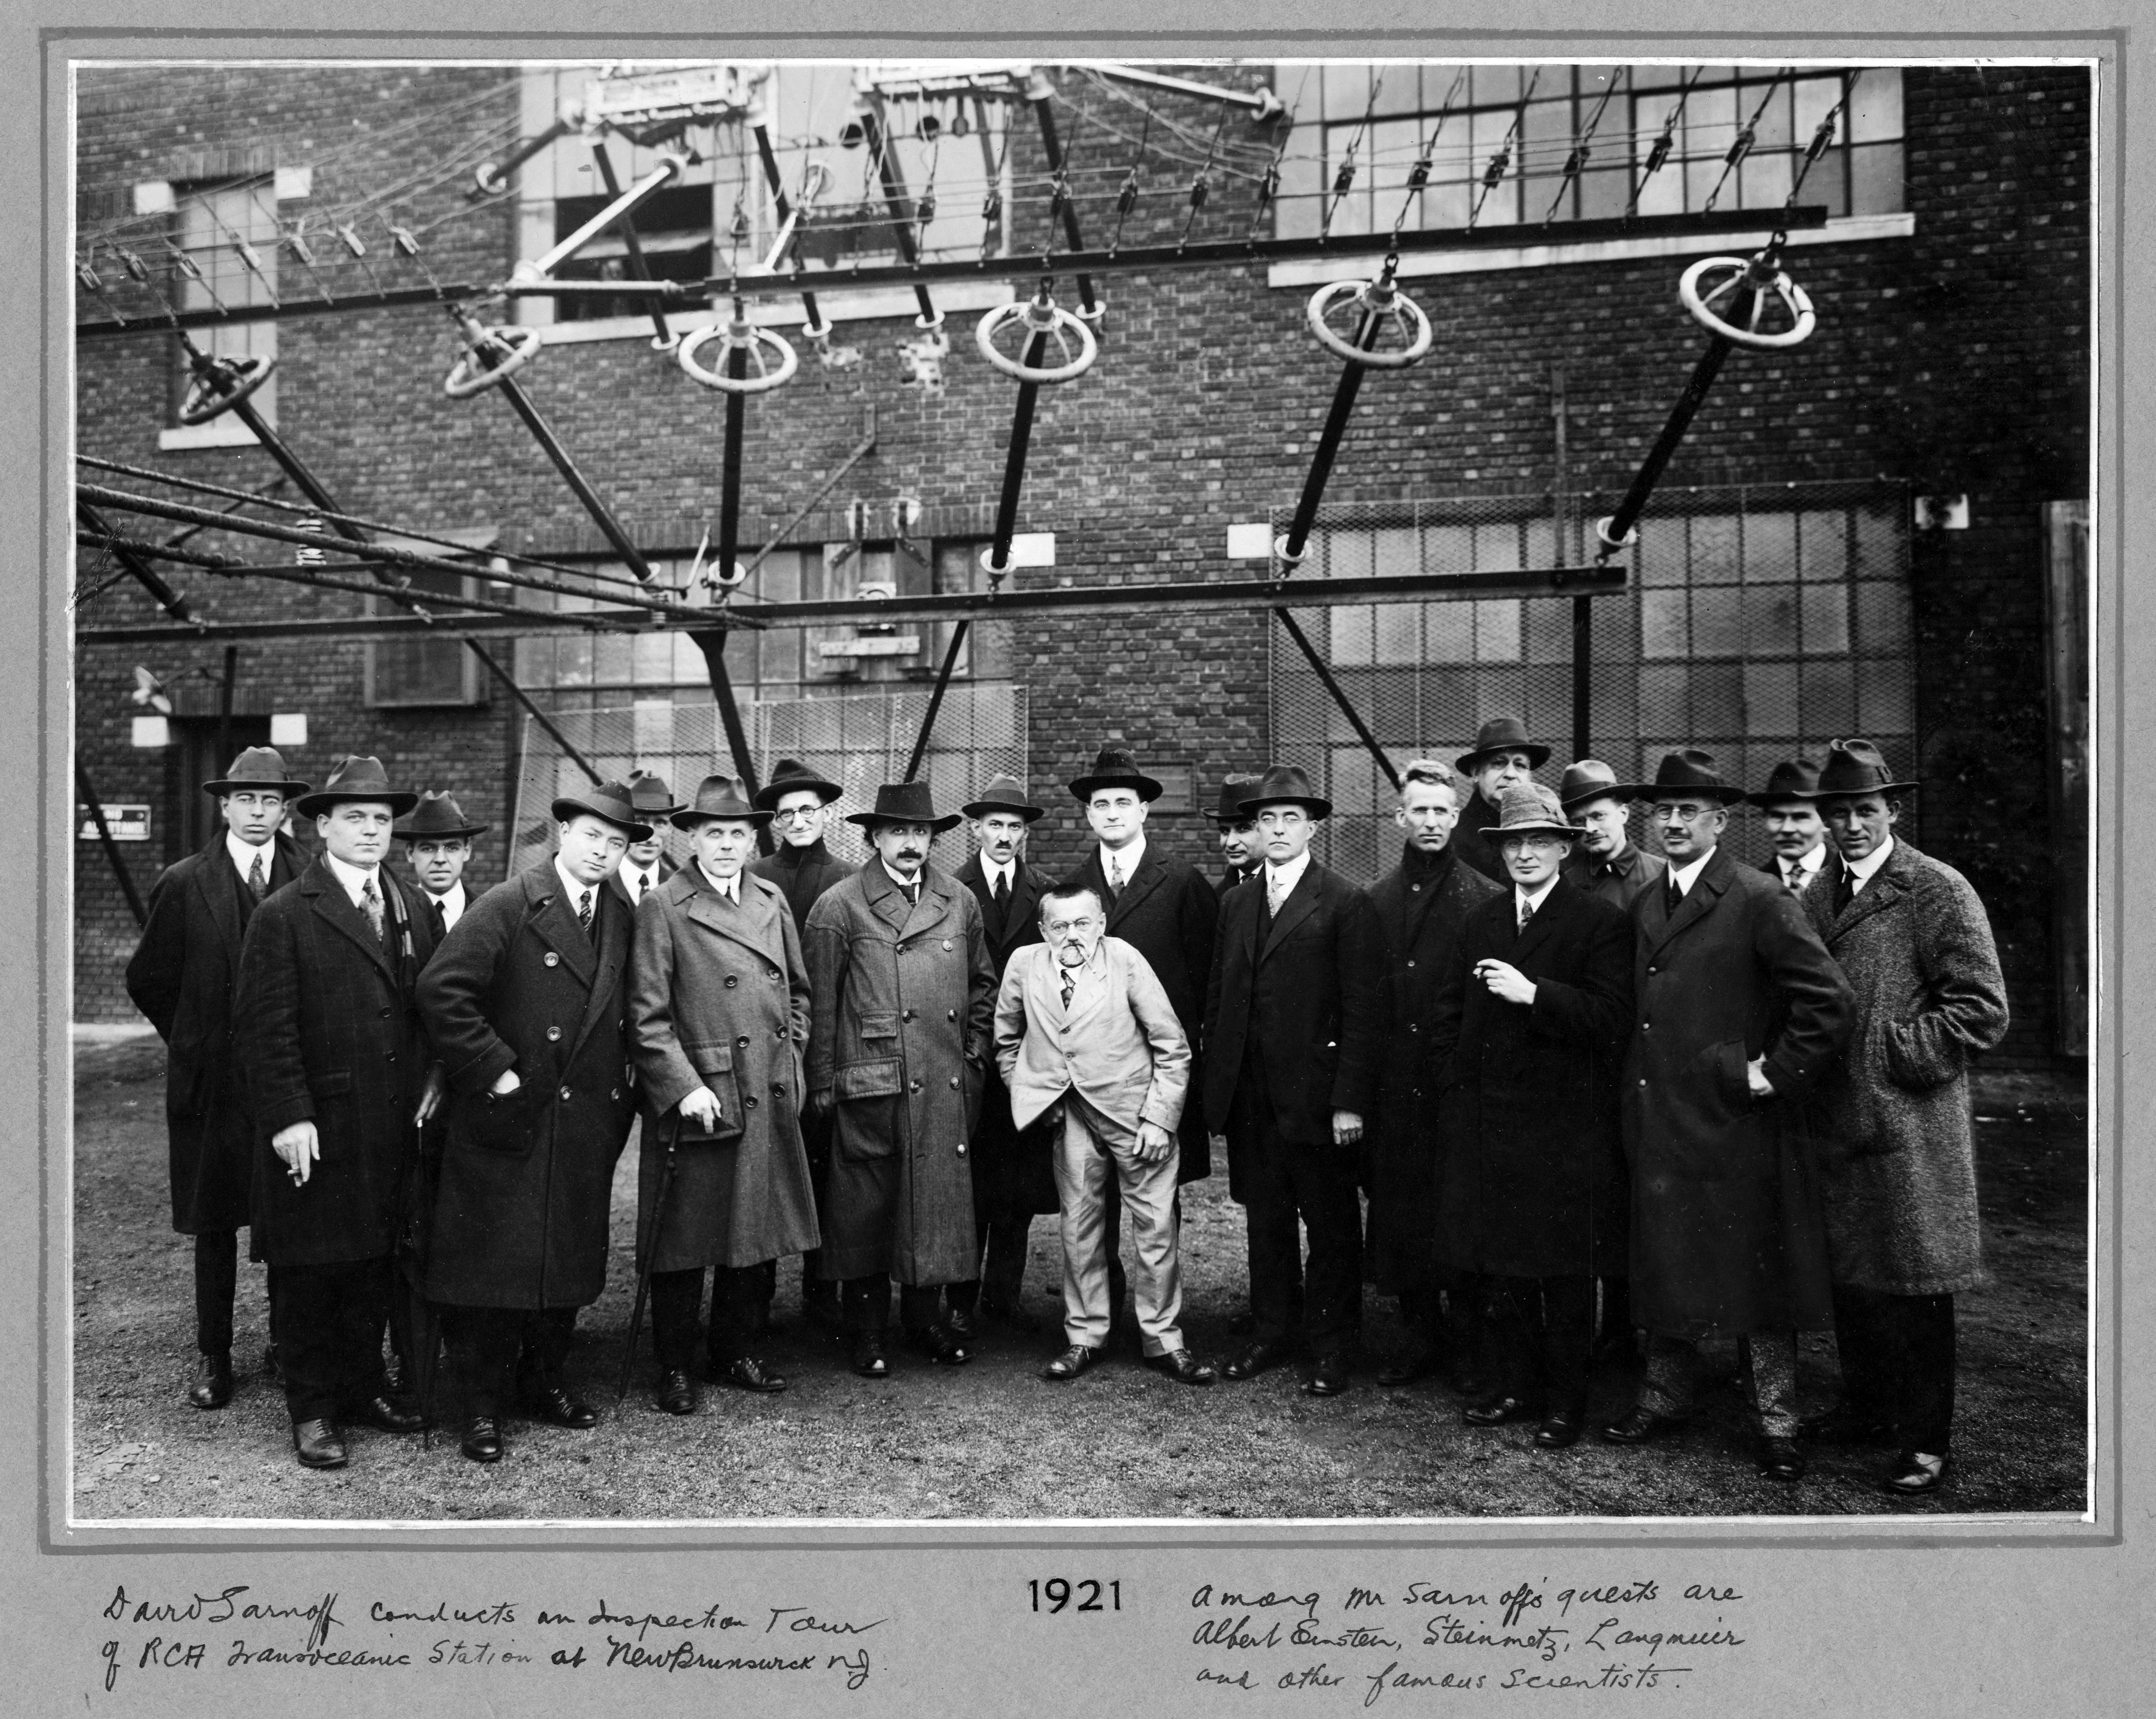 Black and white group photograph of men in suits and hats in front of an industrial building